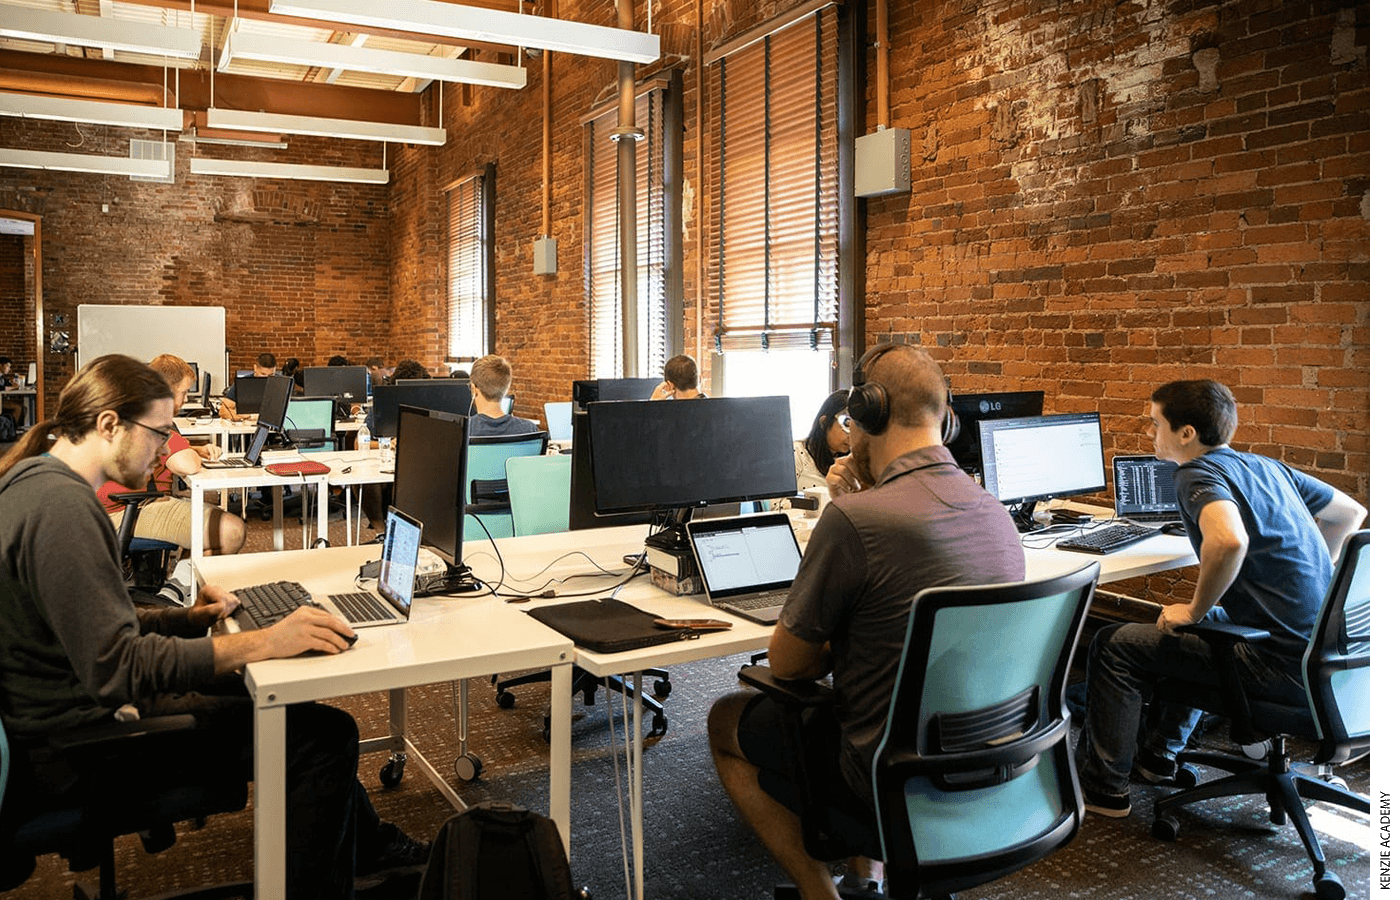 In Indianapolis, Kenzie Academy began in 2017 as a two-year venture-funded technology and apprenticeship program focused on software engineering skills.